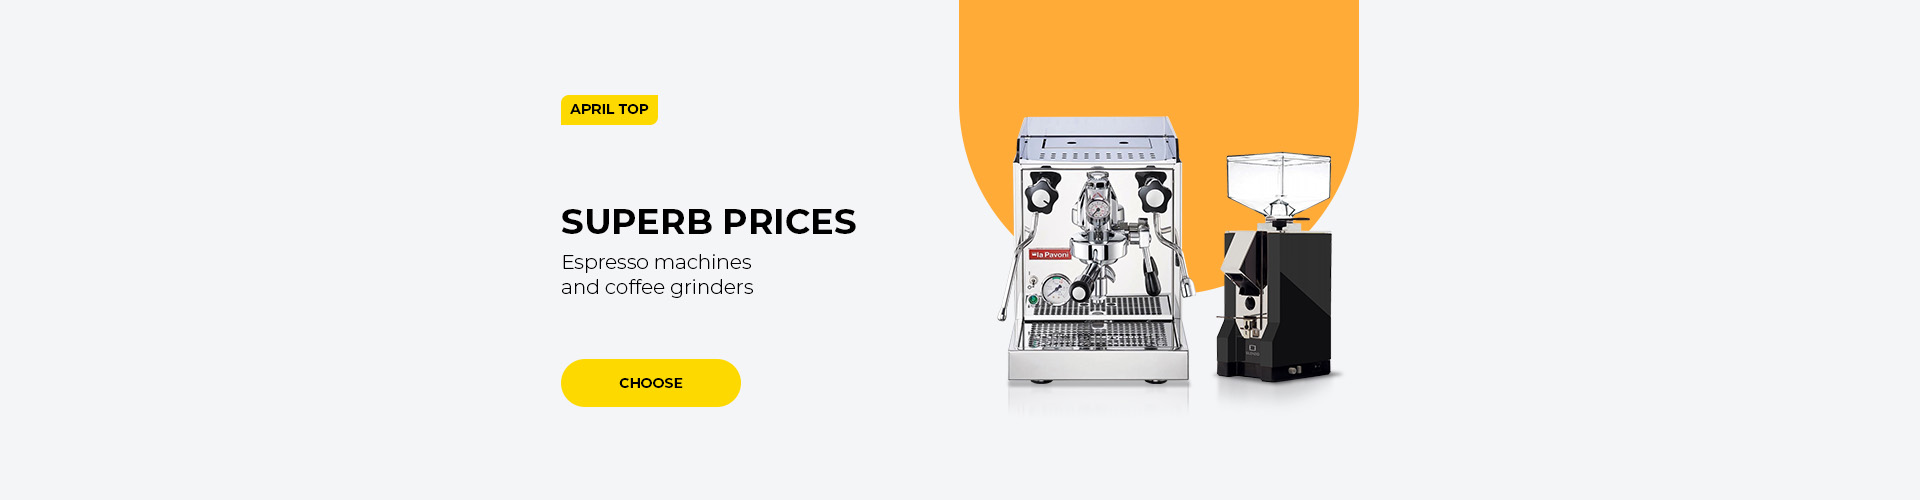 SUPERB PRICES Espresso machines and coffee grinders